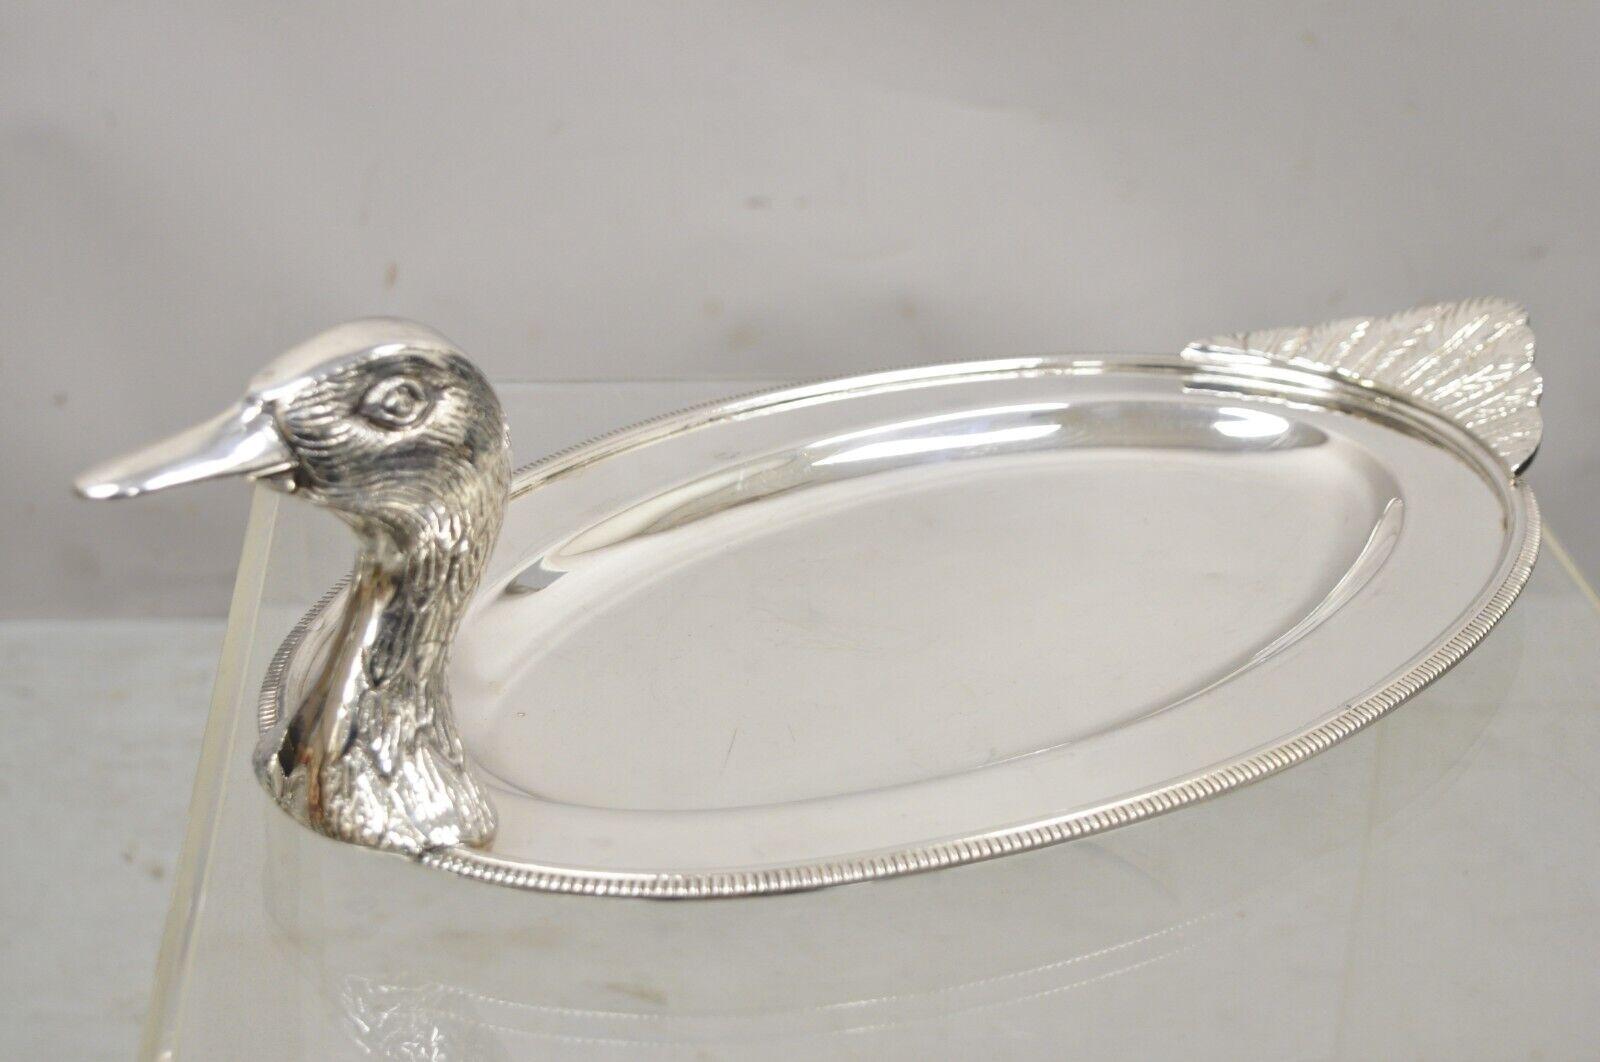 Vintage Modern silver plated duck mallard serving platter attr. Teghini Firenze. Item features a unique figural form, wonderful detail, maker unconfirmed as stamp is worn but attributed to Teghini Firenze. Circa mid 20th century. Measurements: 5